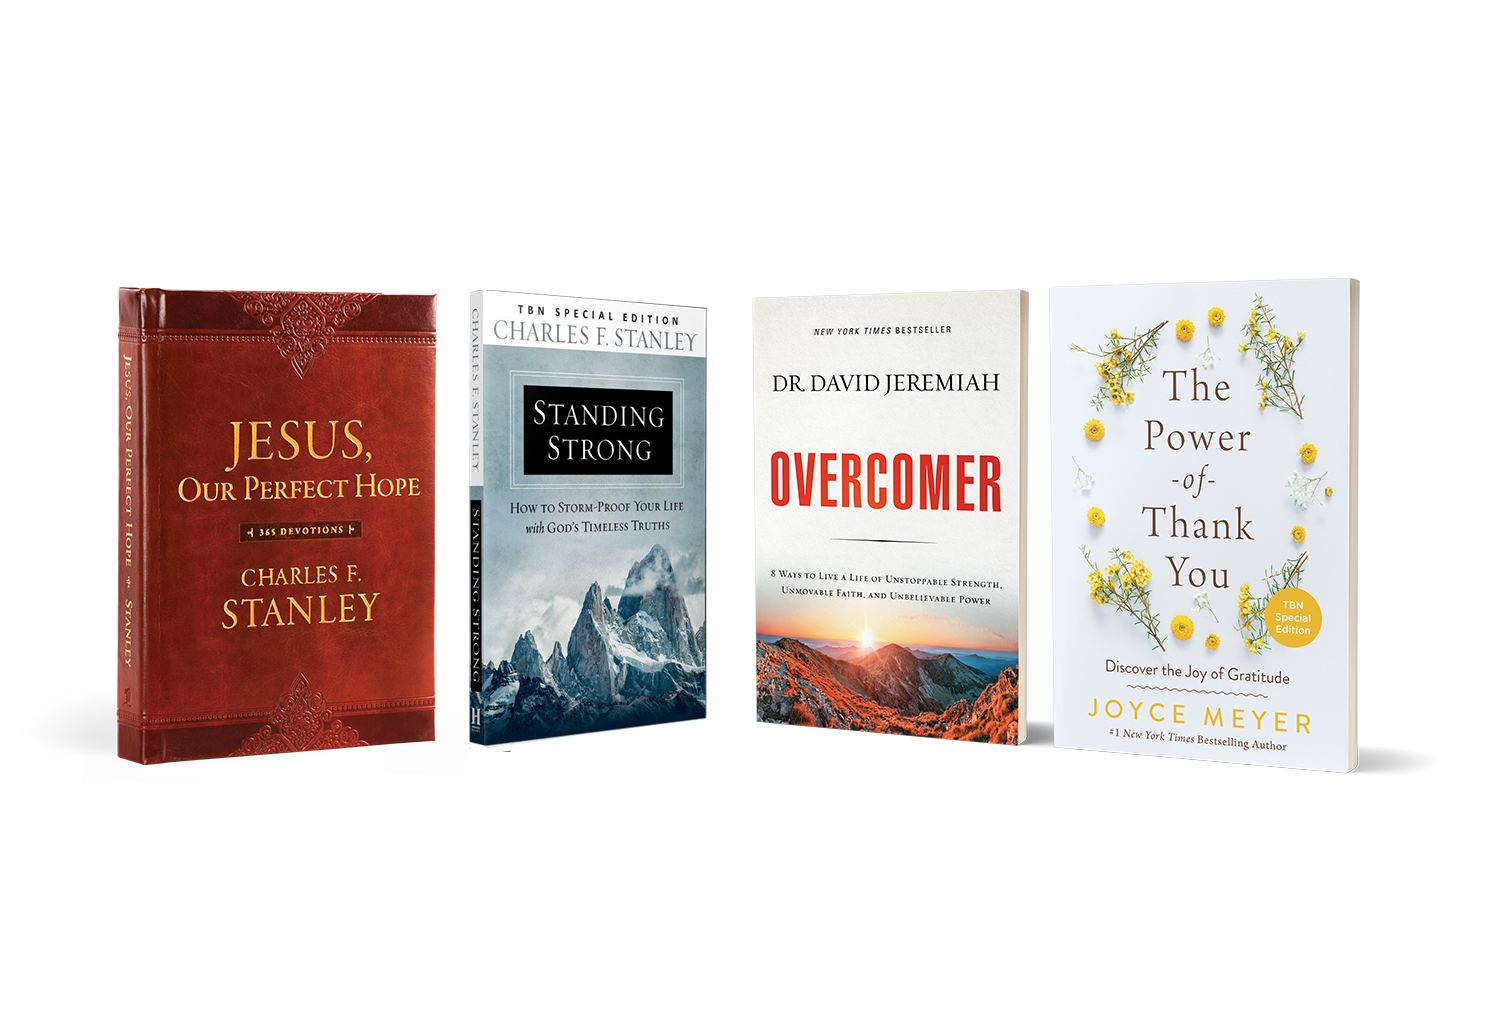 Standing Strong and Jesus, Our Perfect Hope Devotional by Charles Stanley, Overcomer by David Jeremiah, Power of Thank You by Joyce Meyer from TBN